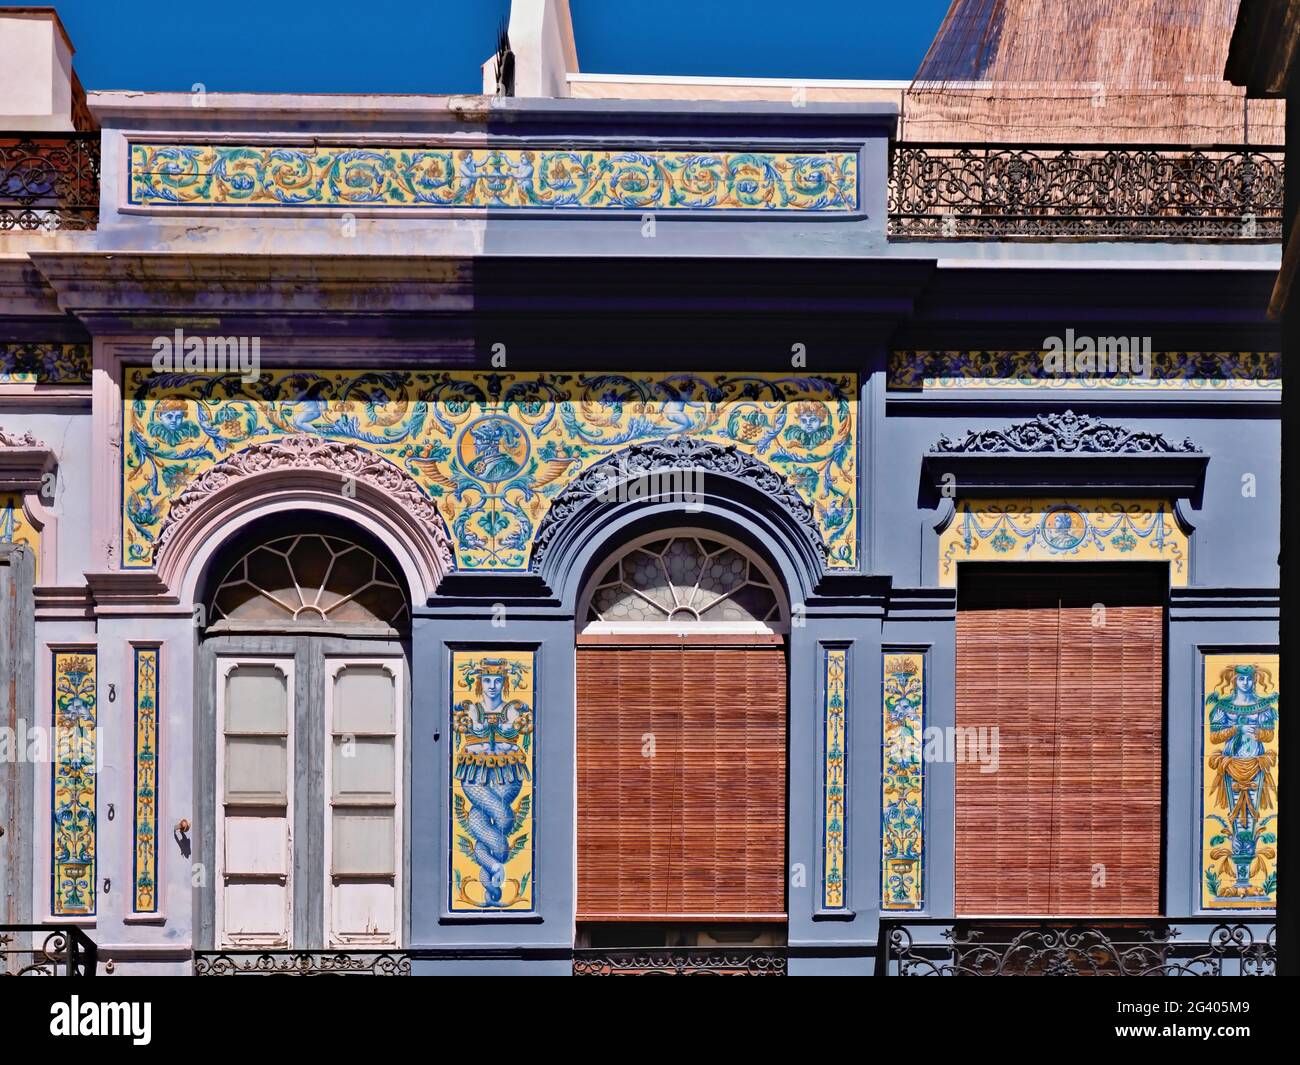 Frontal Art Nouveau facade, richly decorated with painted tiles, in Santa Cruz de Tenerife. The doors have round arches and glass decorations, the til Stock Photo